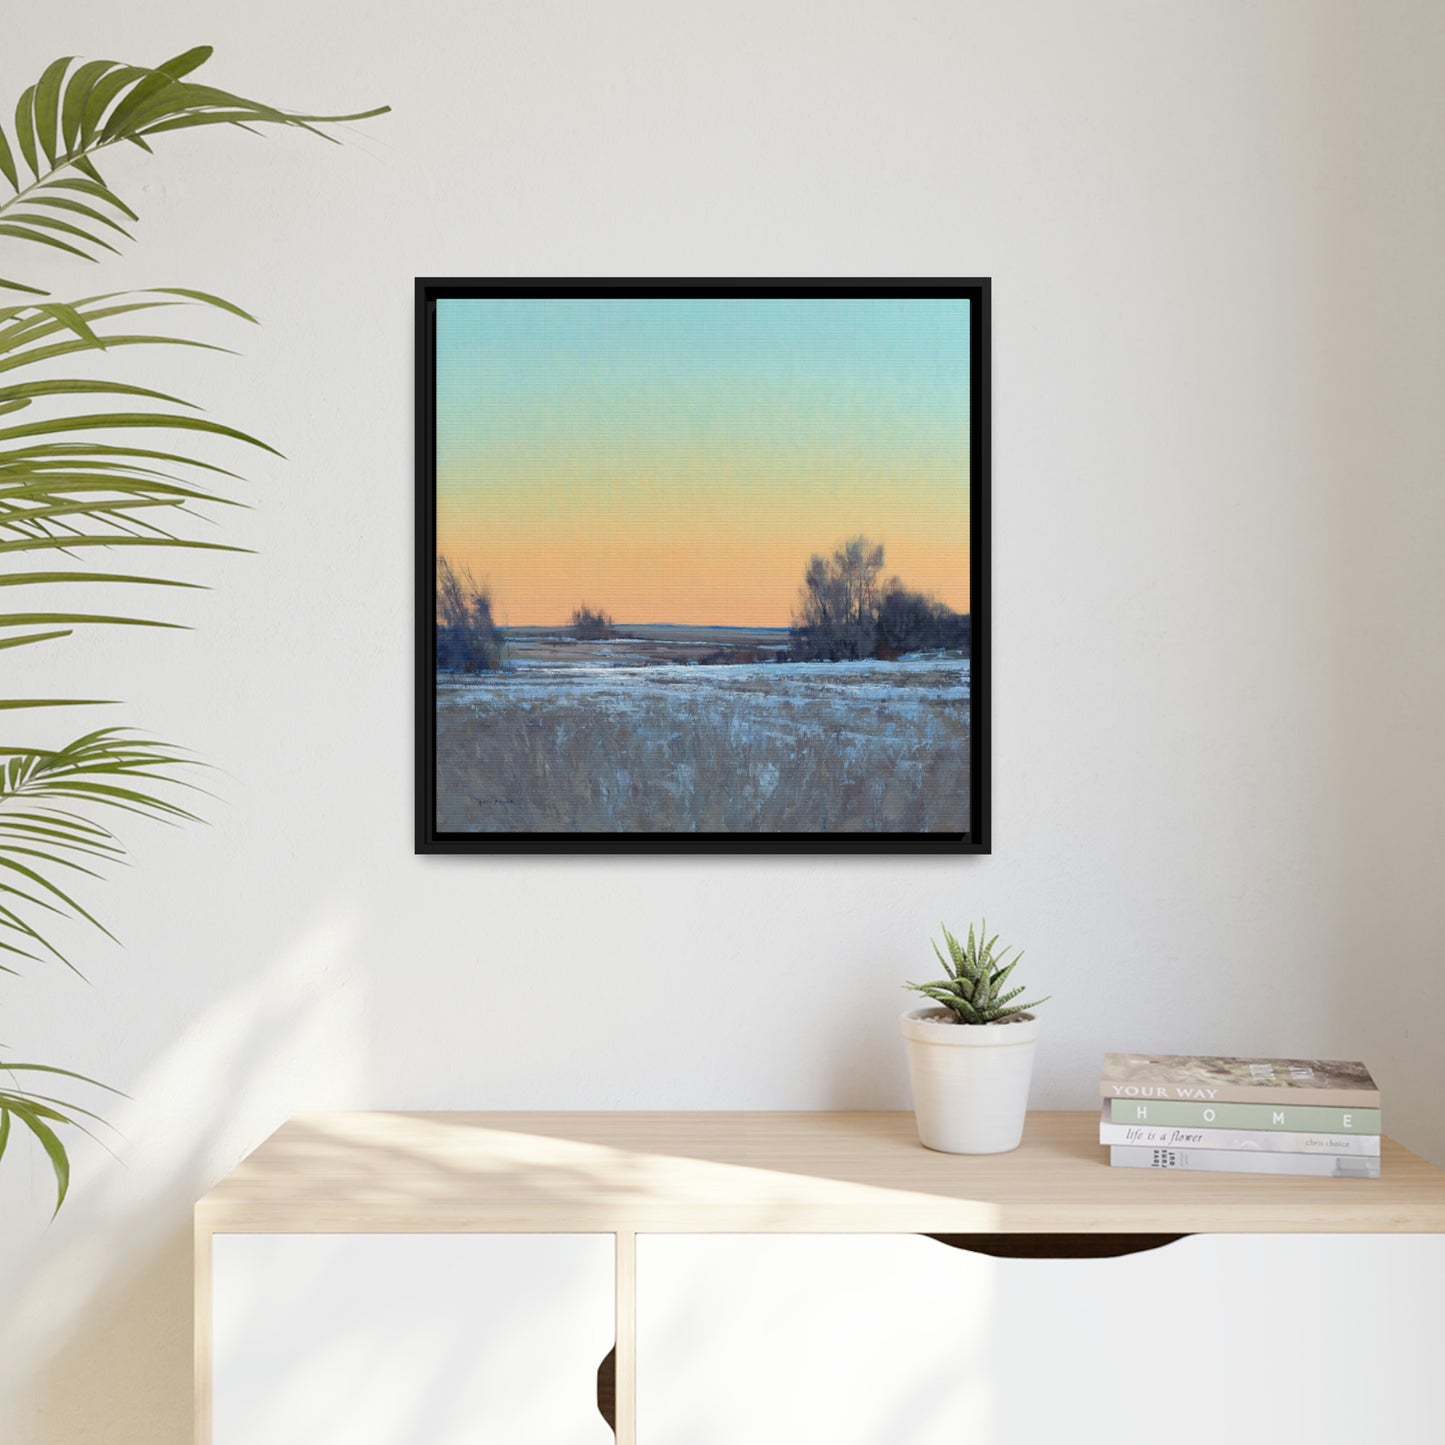 Ben Bauer: "Late Afternoon in March, Lowry, MN" - Square Framed Canvas Reproduction